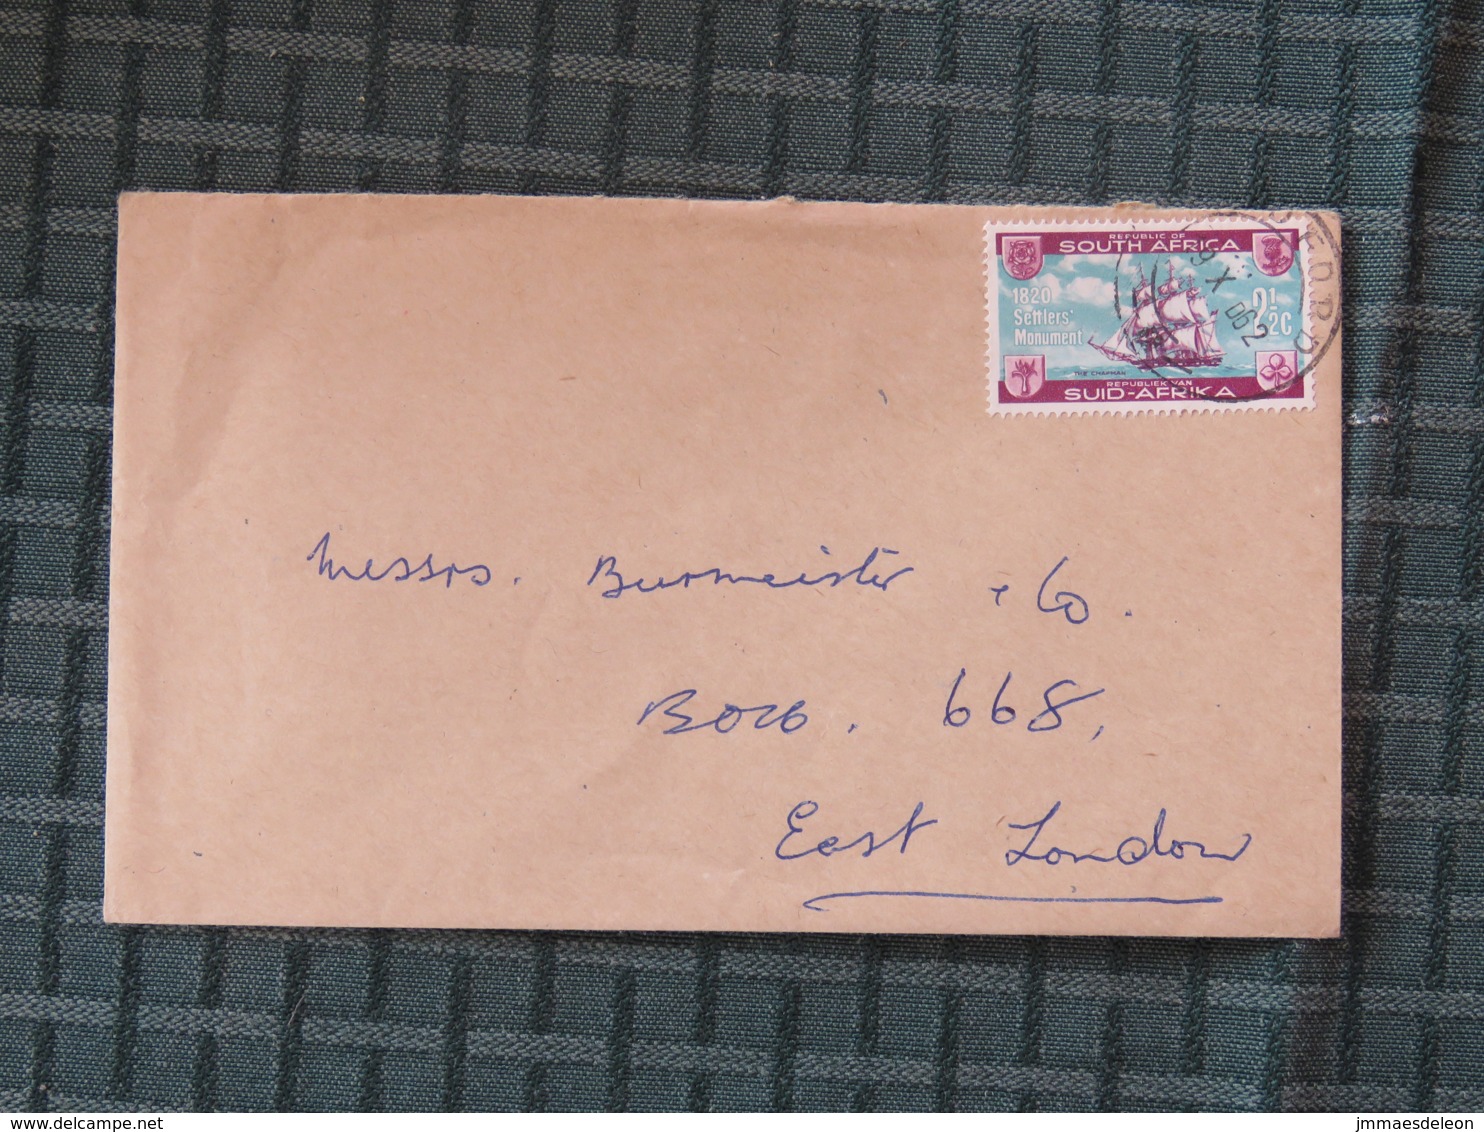 South Africa 1962 Cover Local To East London - Ships - Carnets